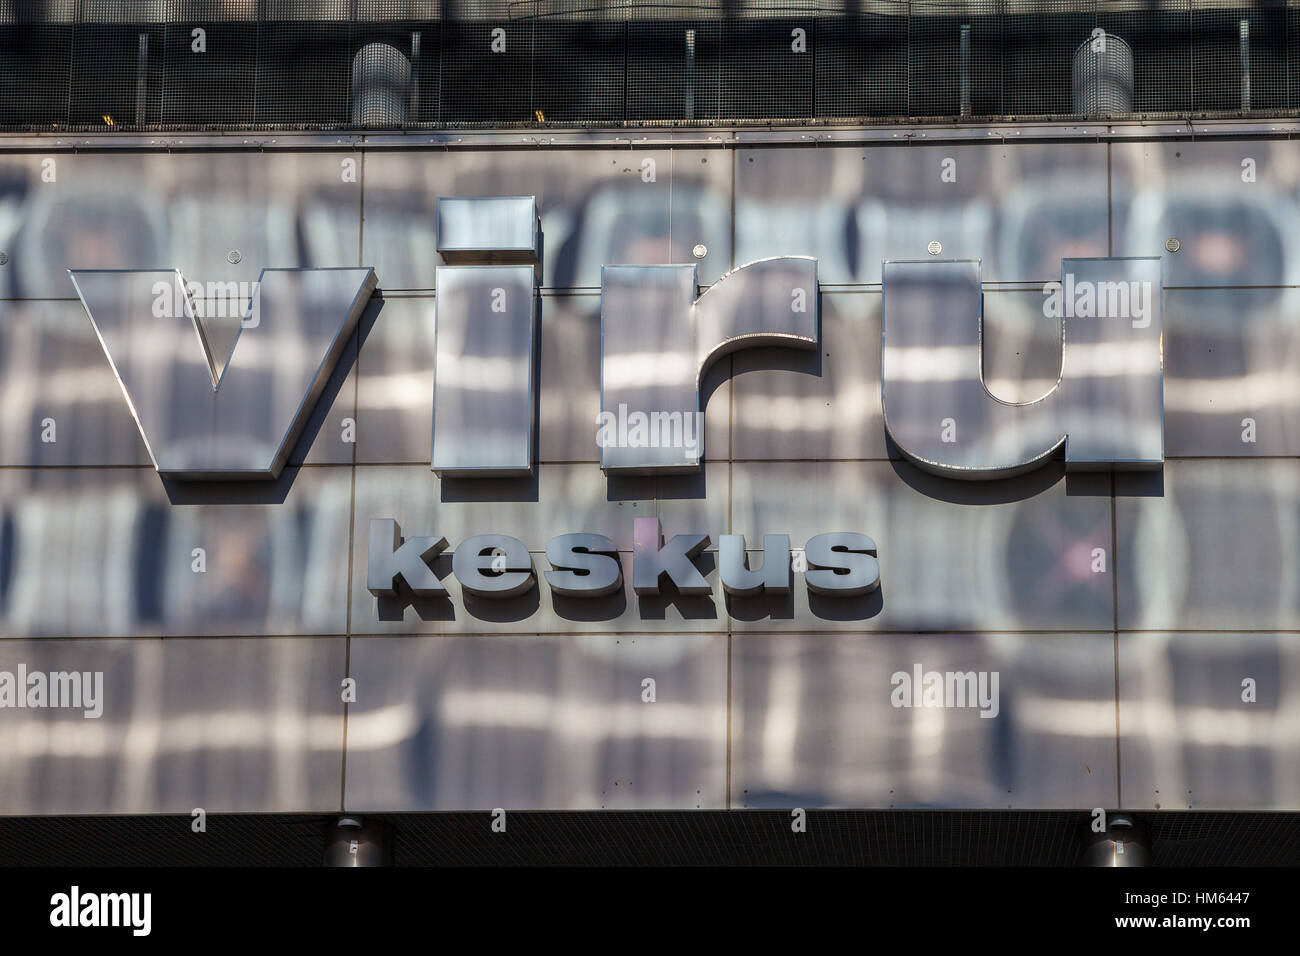 Signboard 'Viru Keskus' - big city trade center, covered by reflected rays of sun Stock Photo